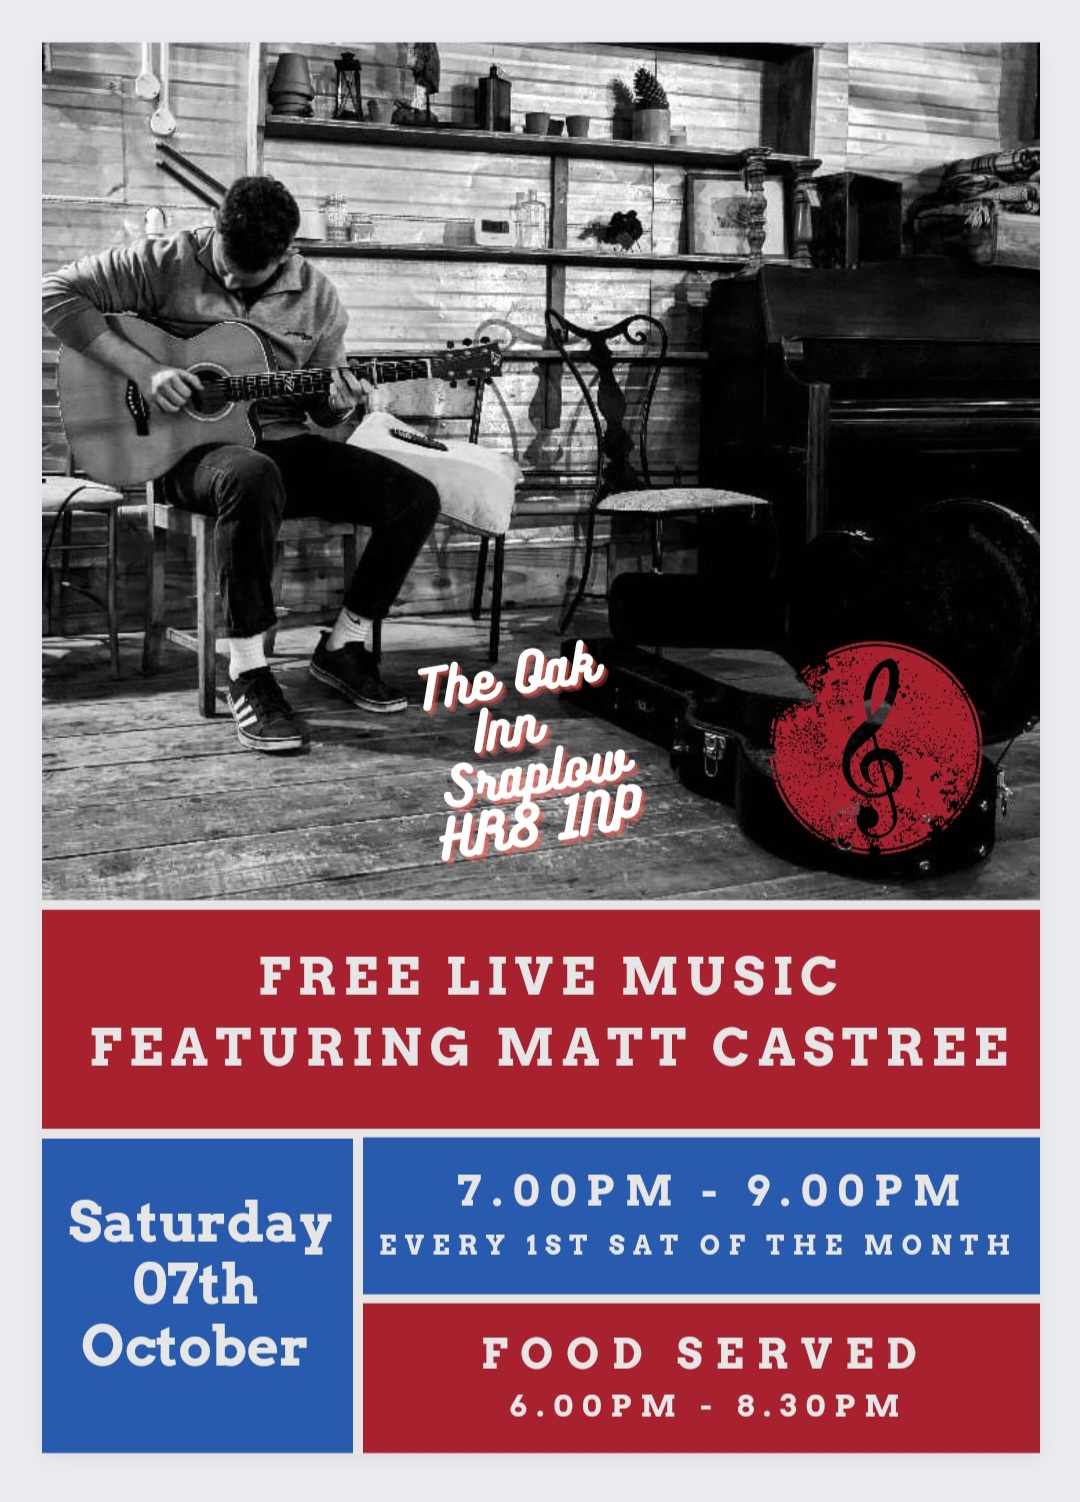 FREE LIVE MUSIC - 1st Sat of every Month - 7.00pm until 9.00pm